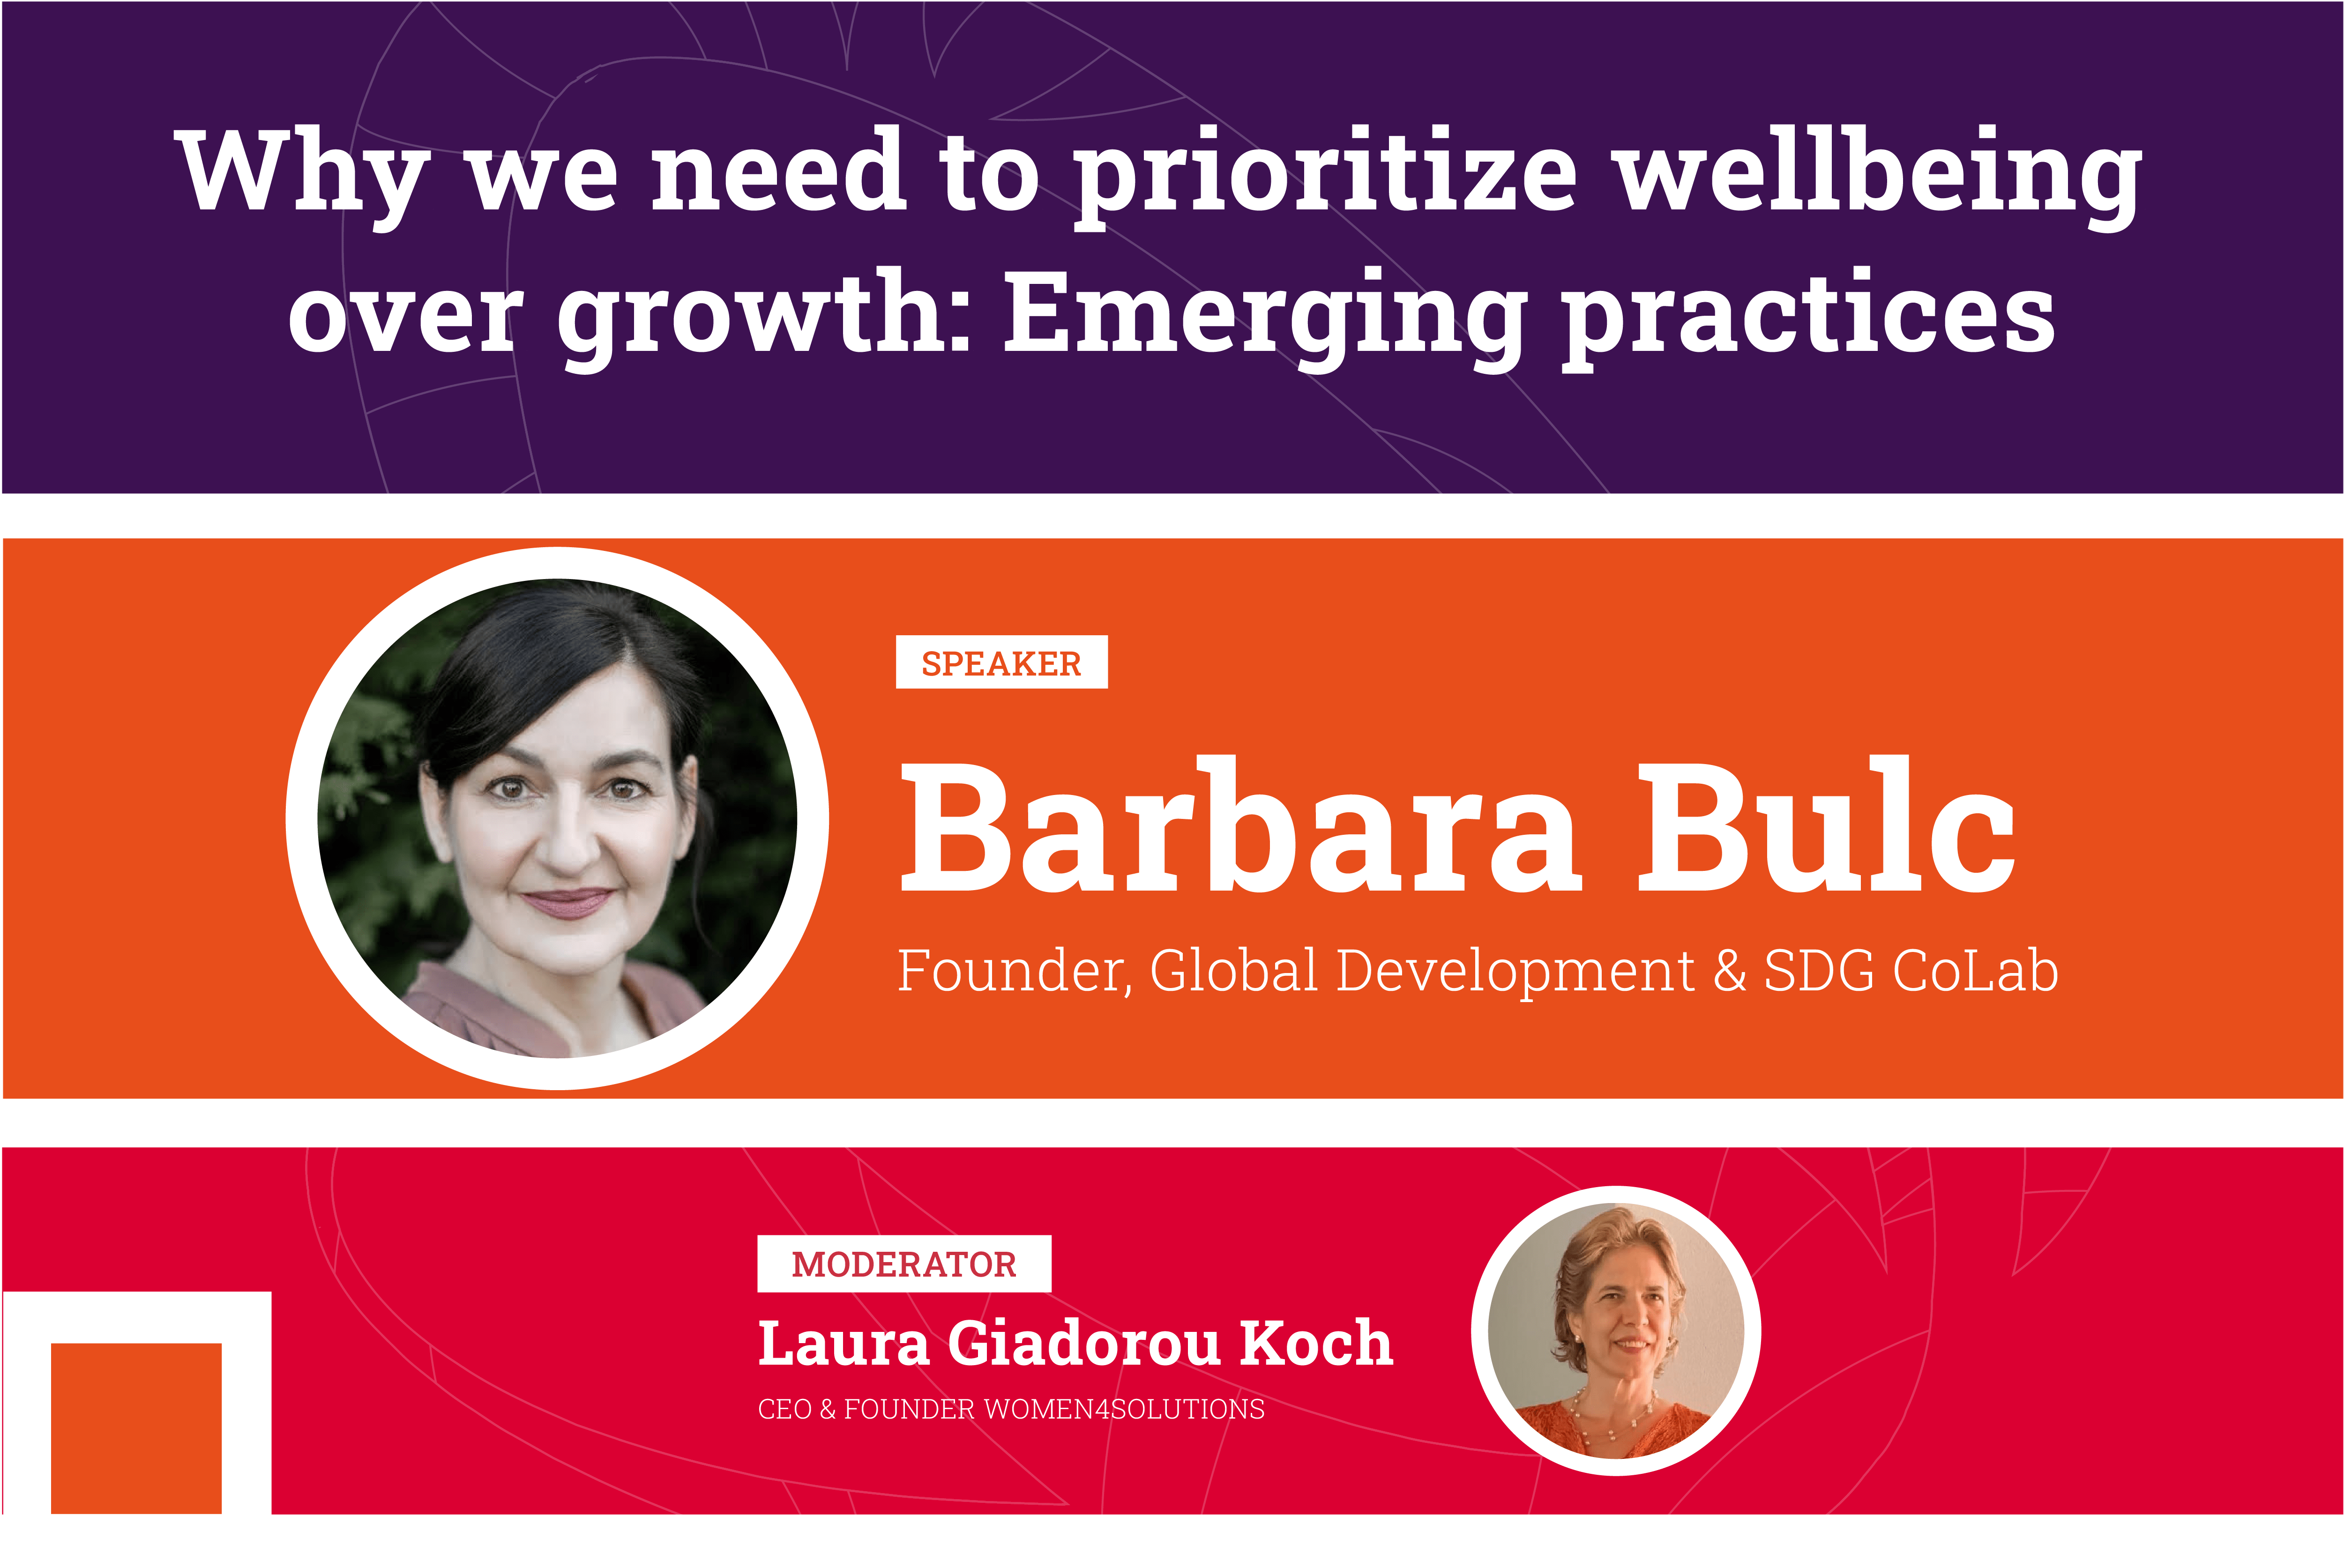 Why we need to prioritize wellbeing over growth: Emerging practices